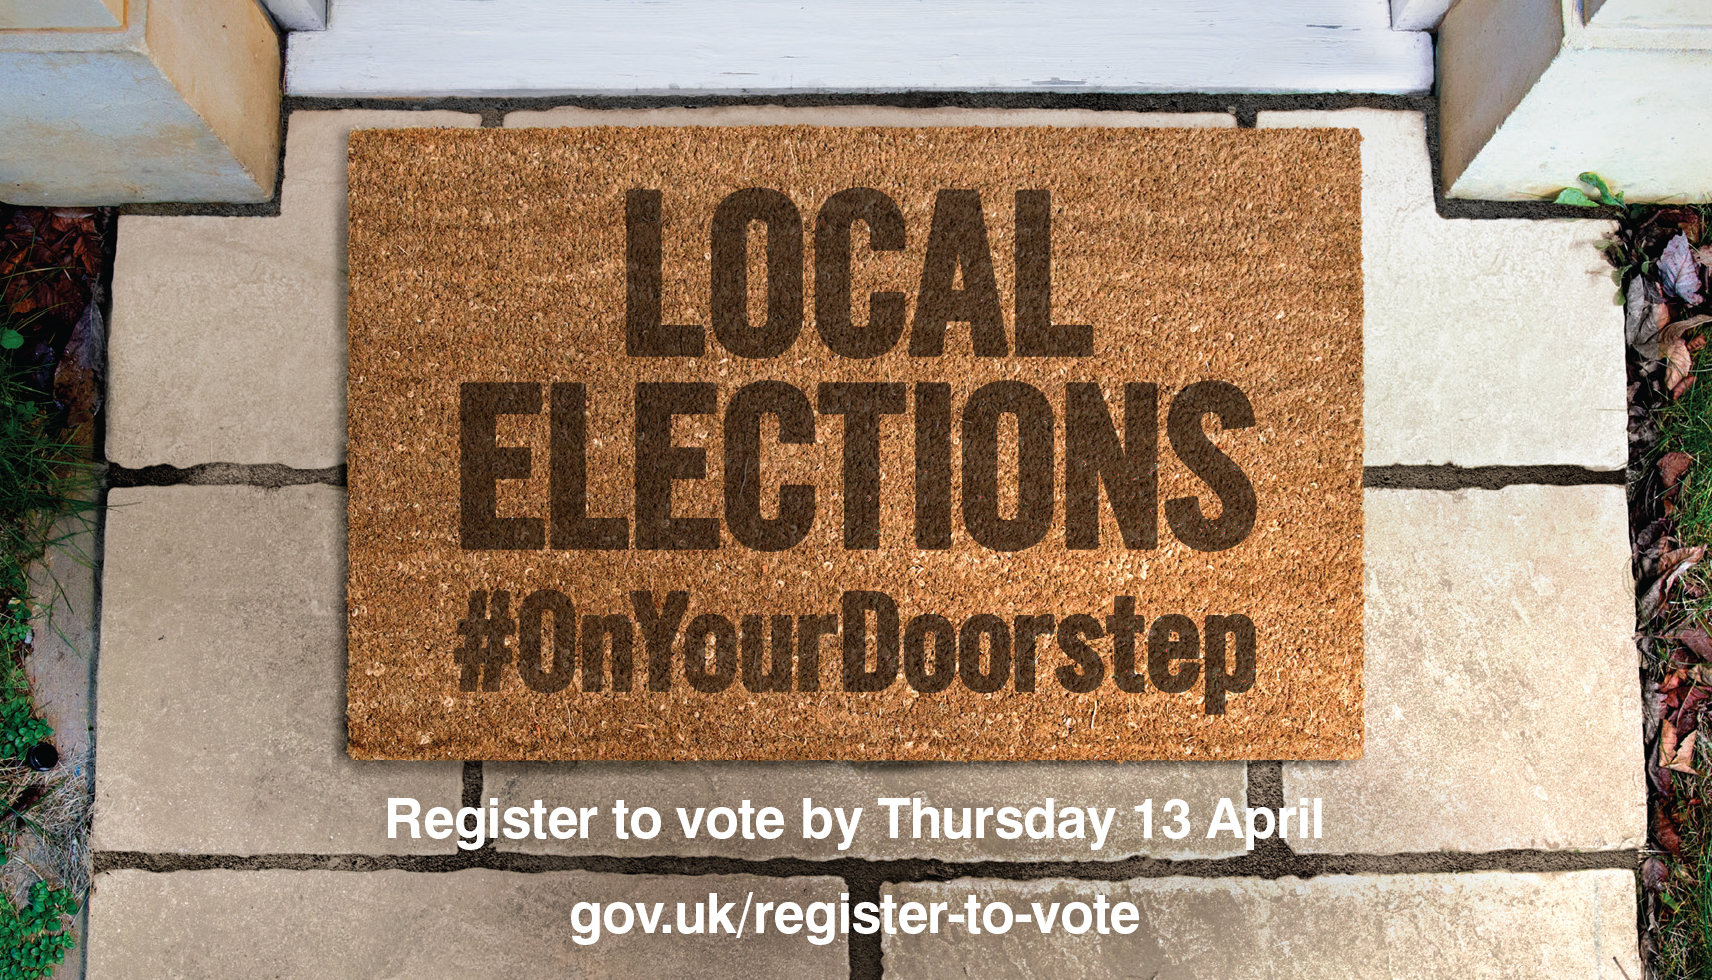 Are you on the electoral register?